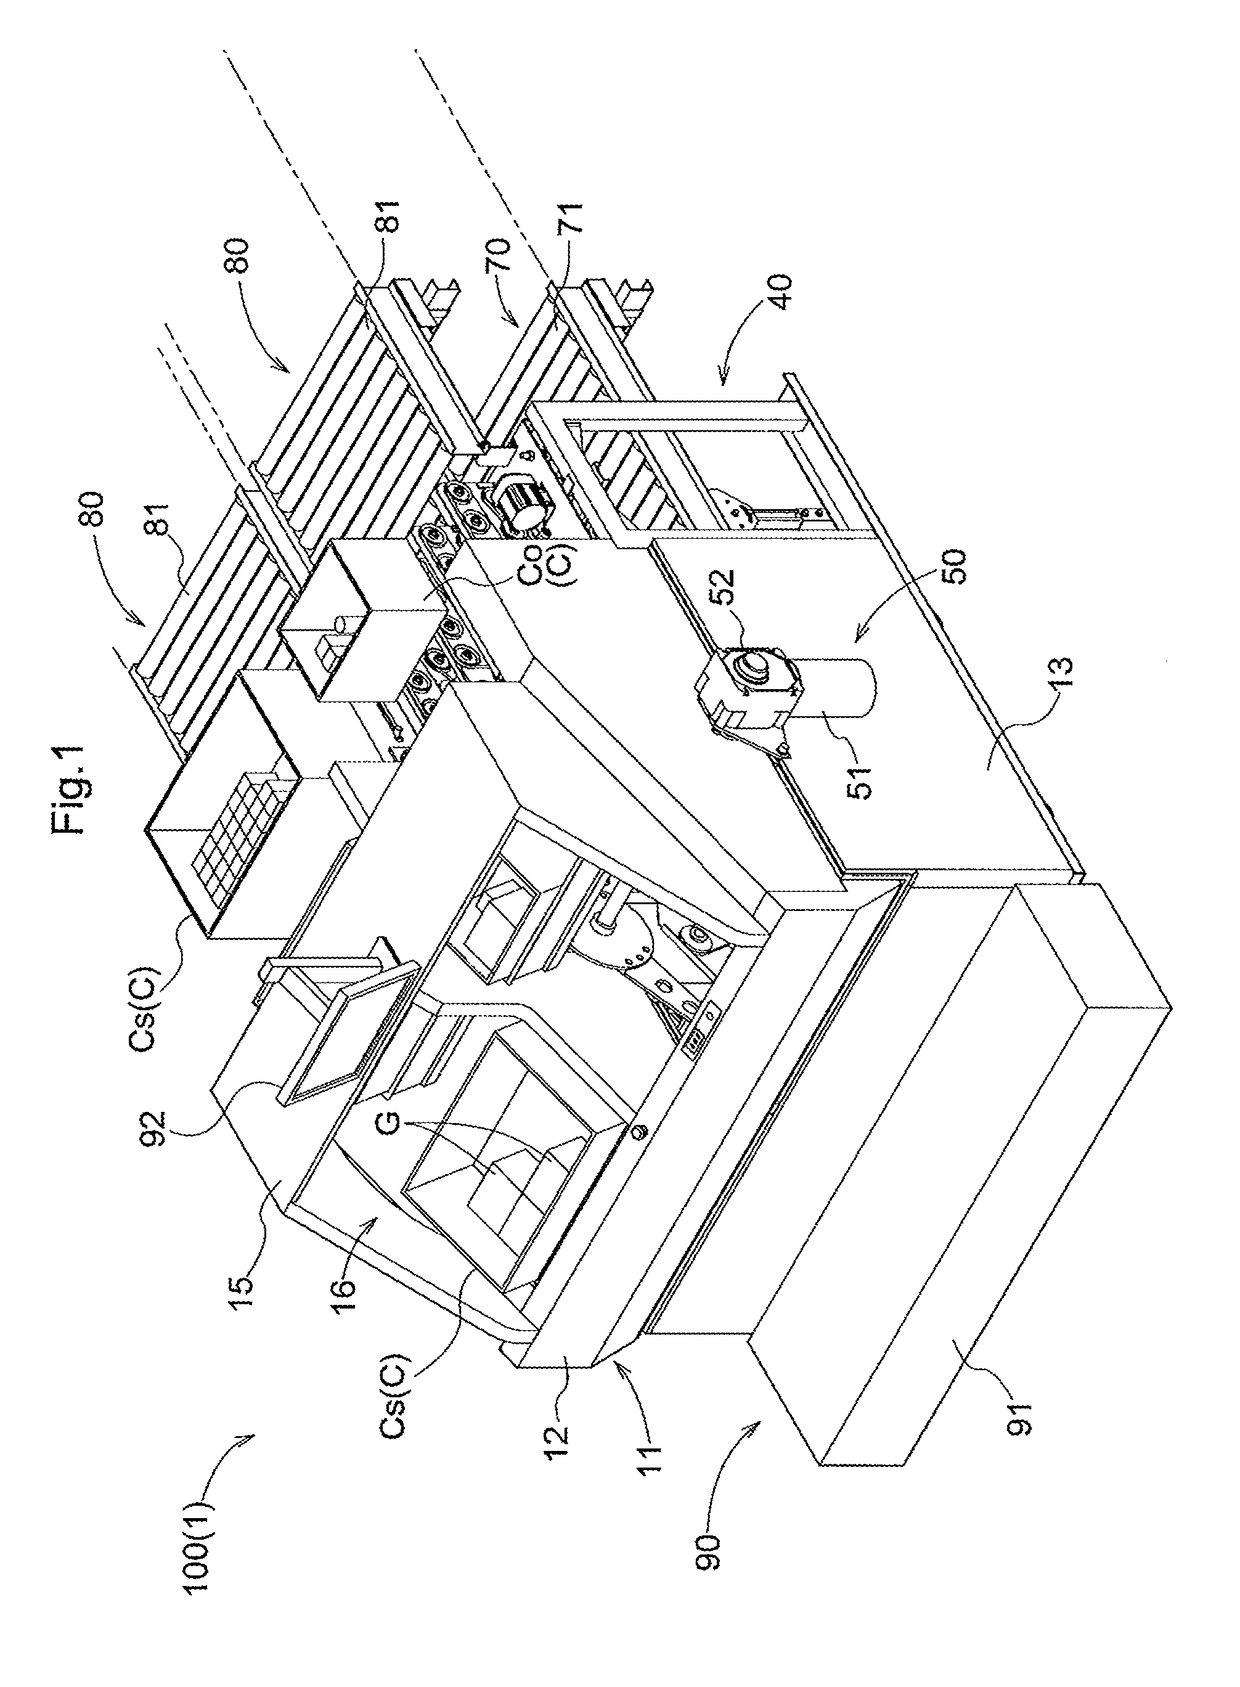 Article Transport Apparatus and Article Transport Facility